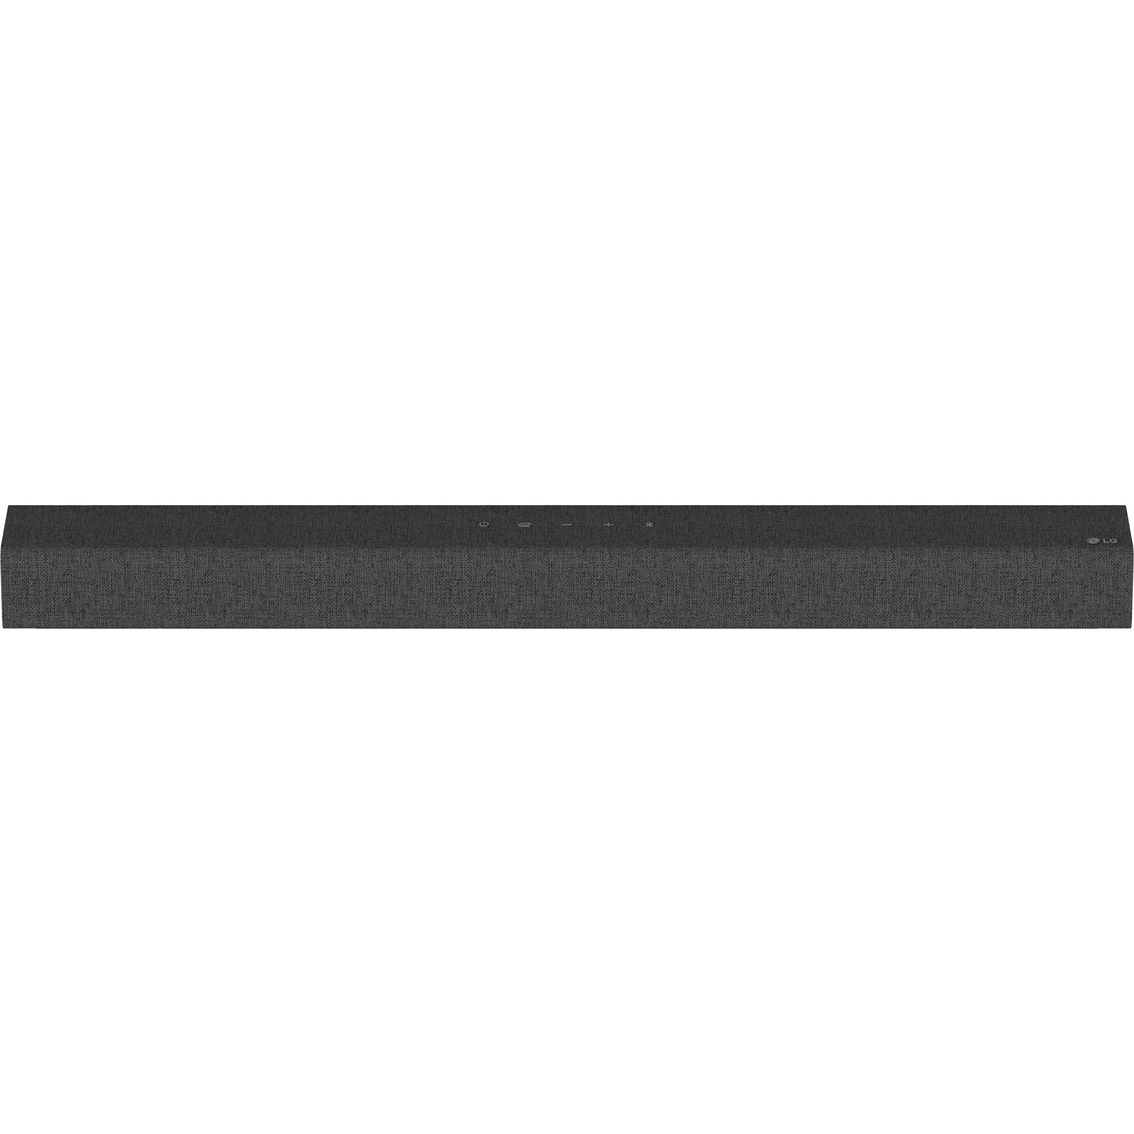 LG SP2 2.1 Channel 100W Sound Bar with Bluetooth and Built-In Subwoofer - Image 3 of 8